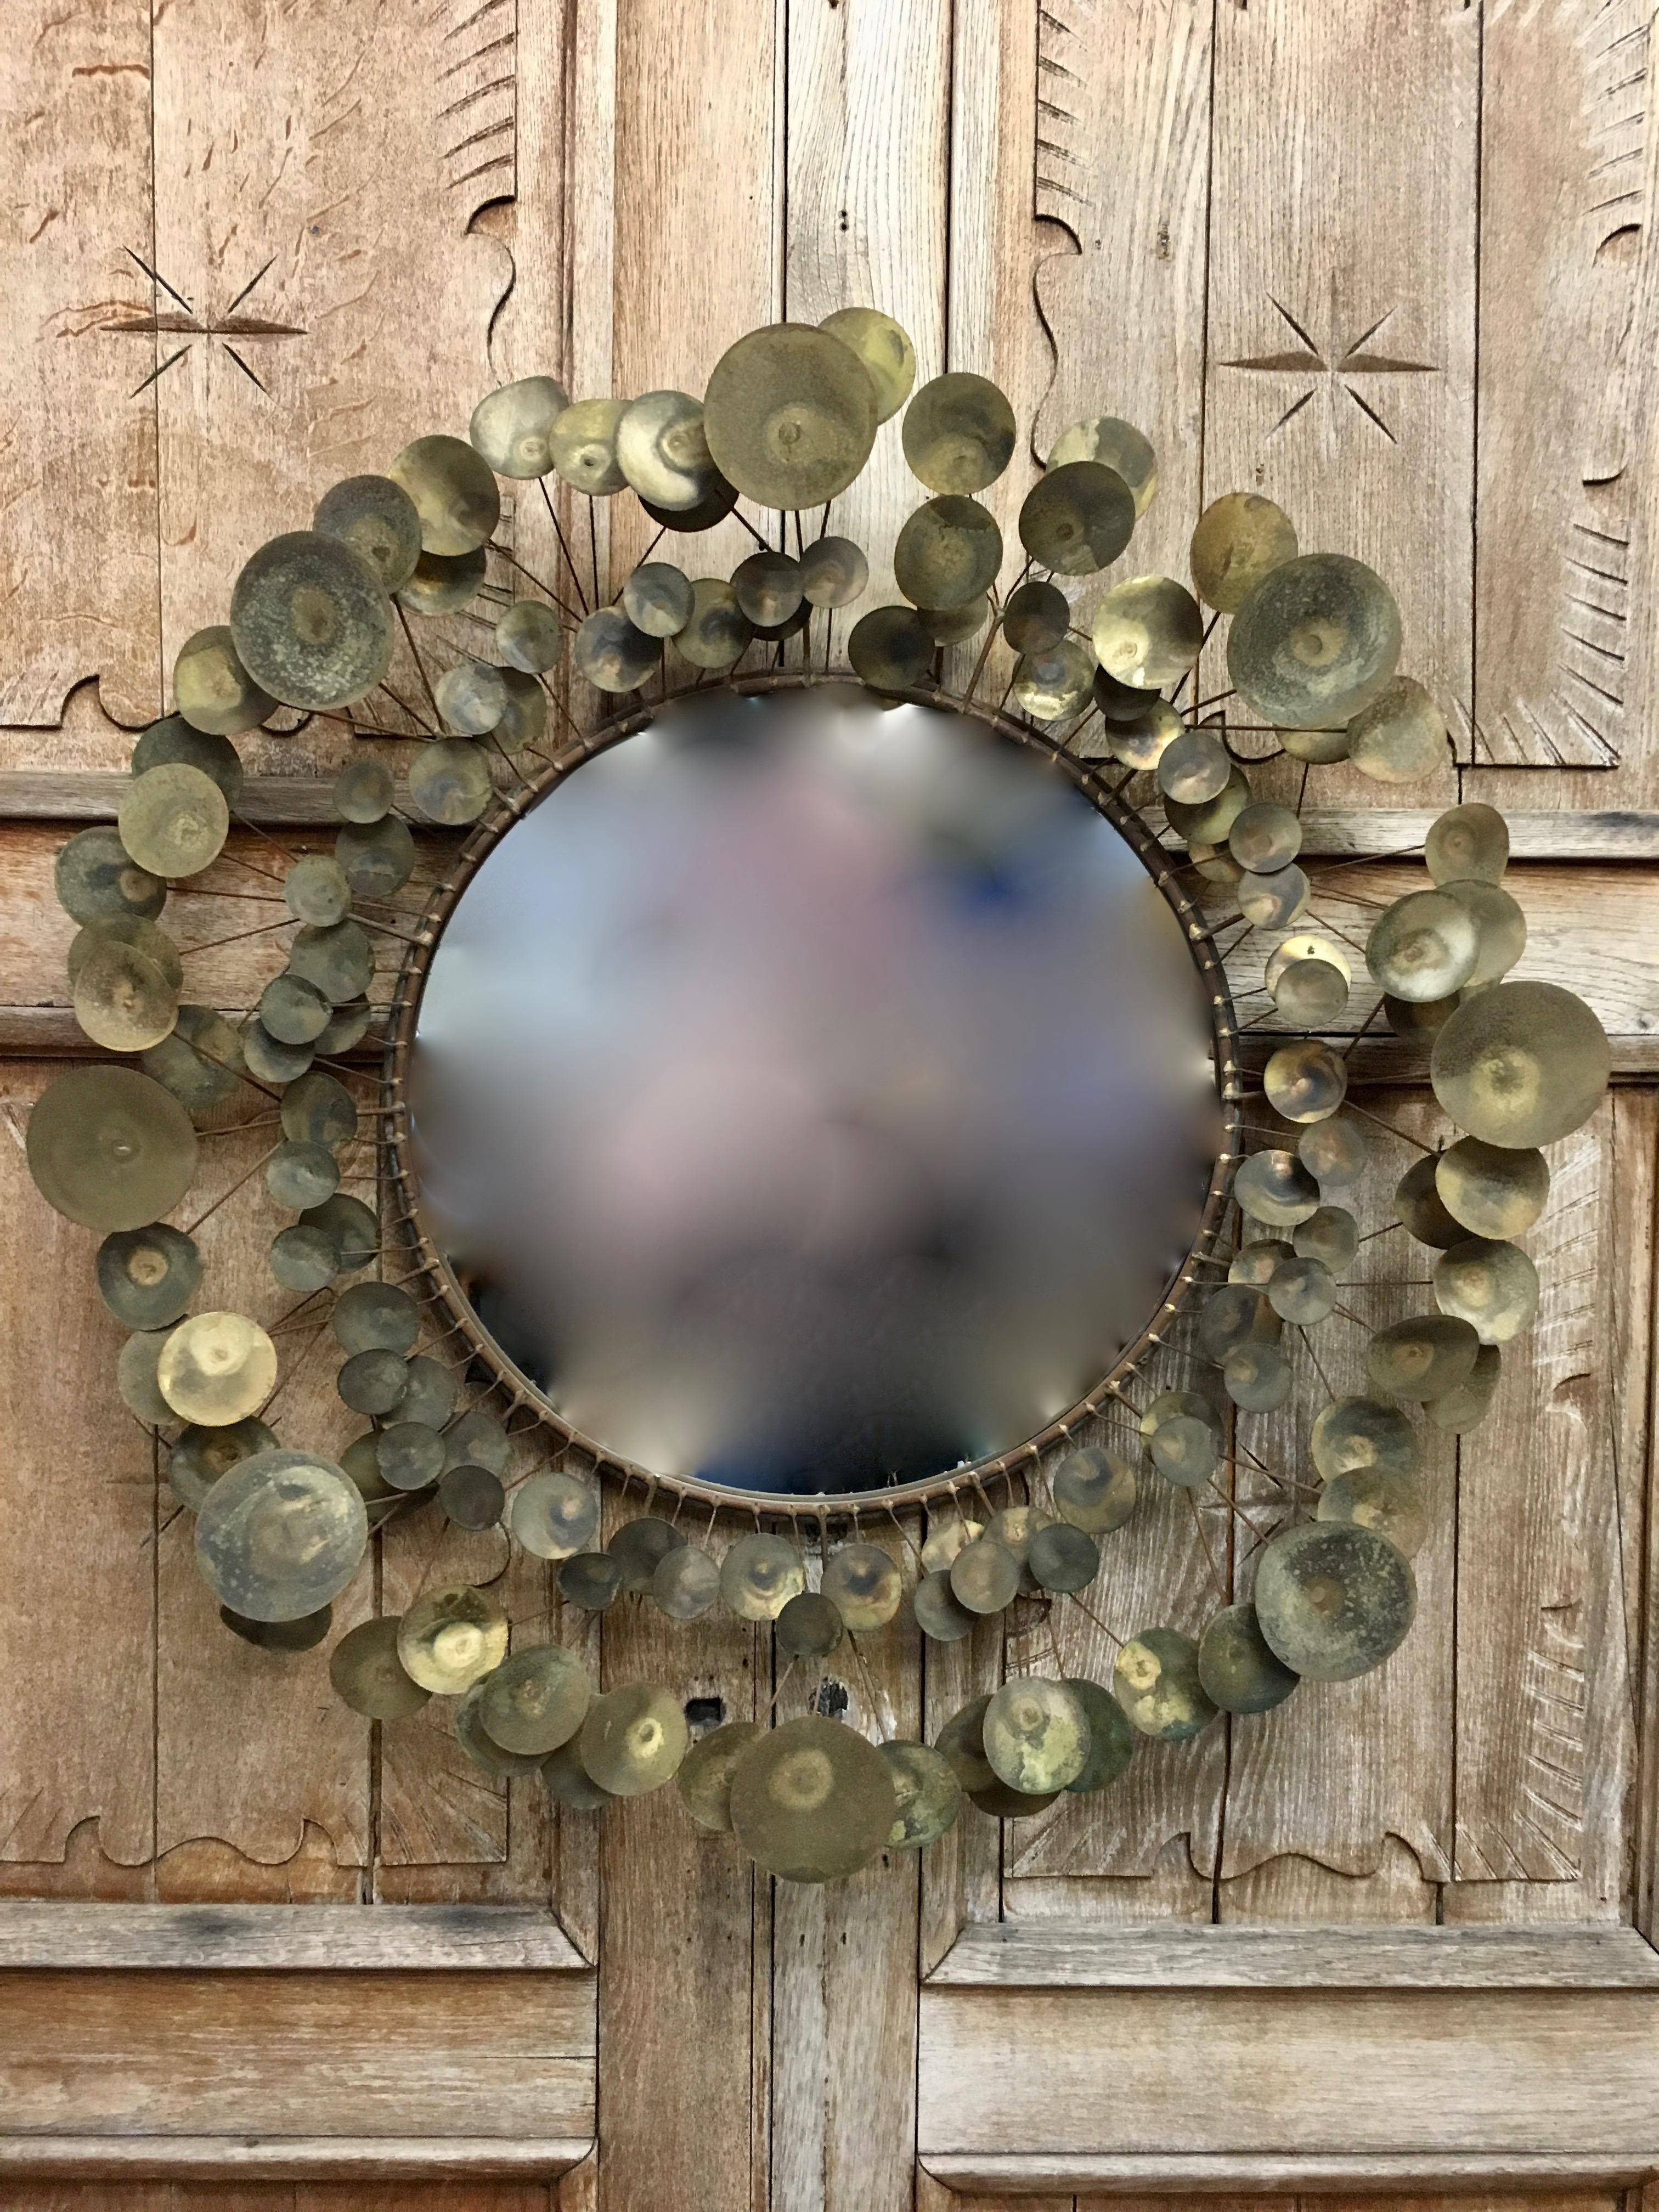 Early version of the Raindrops mirror with fifty years of natural patina.